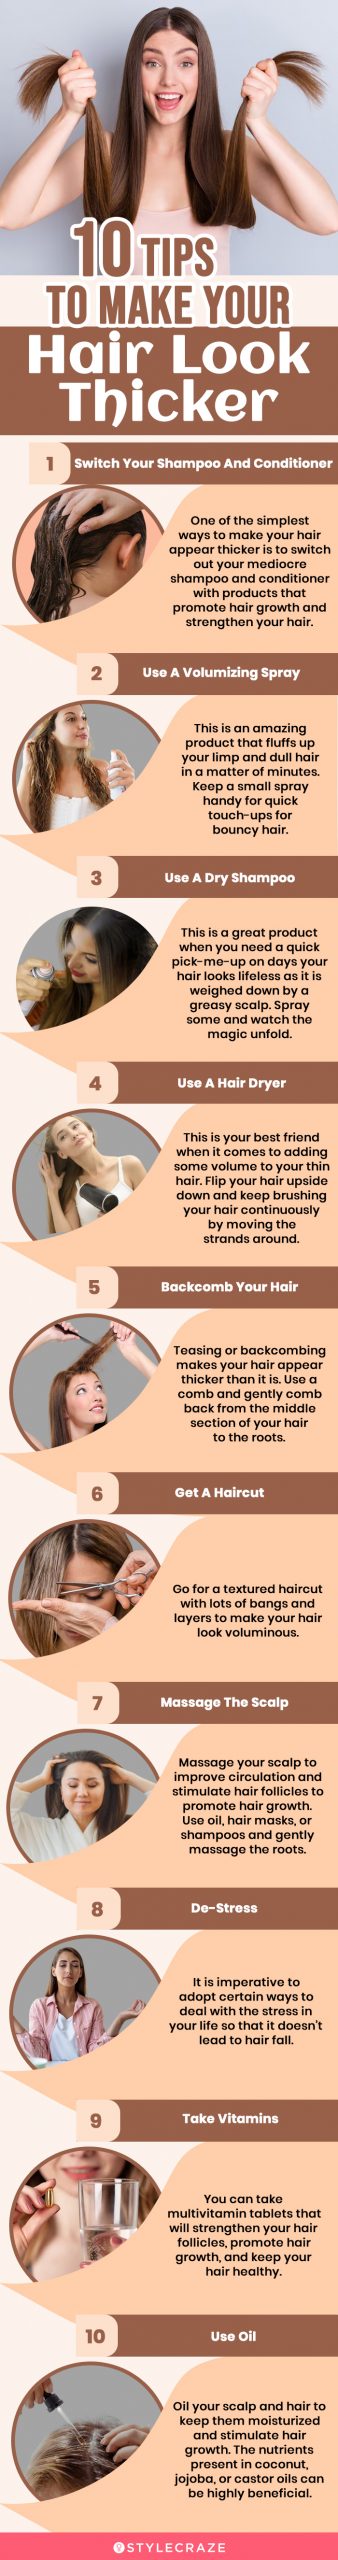 10 tips to make your hair look thicker (infographic)